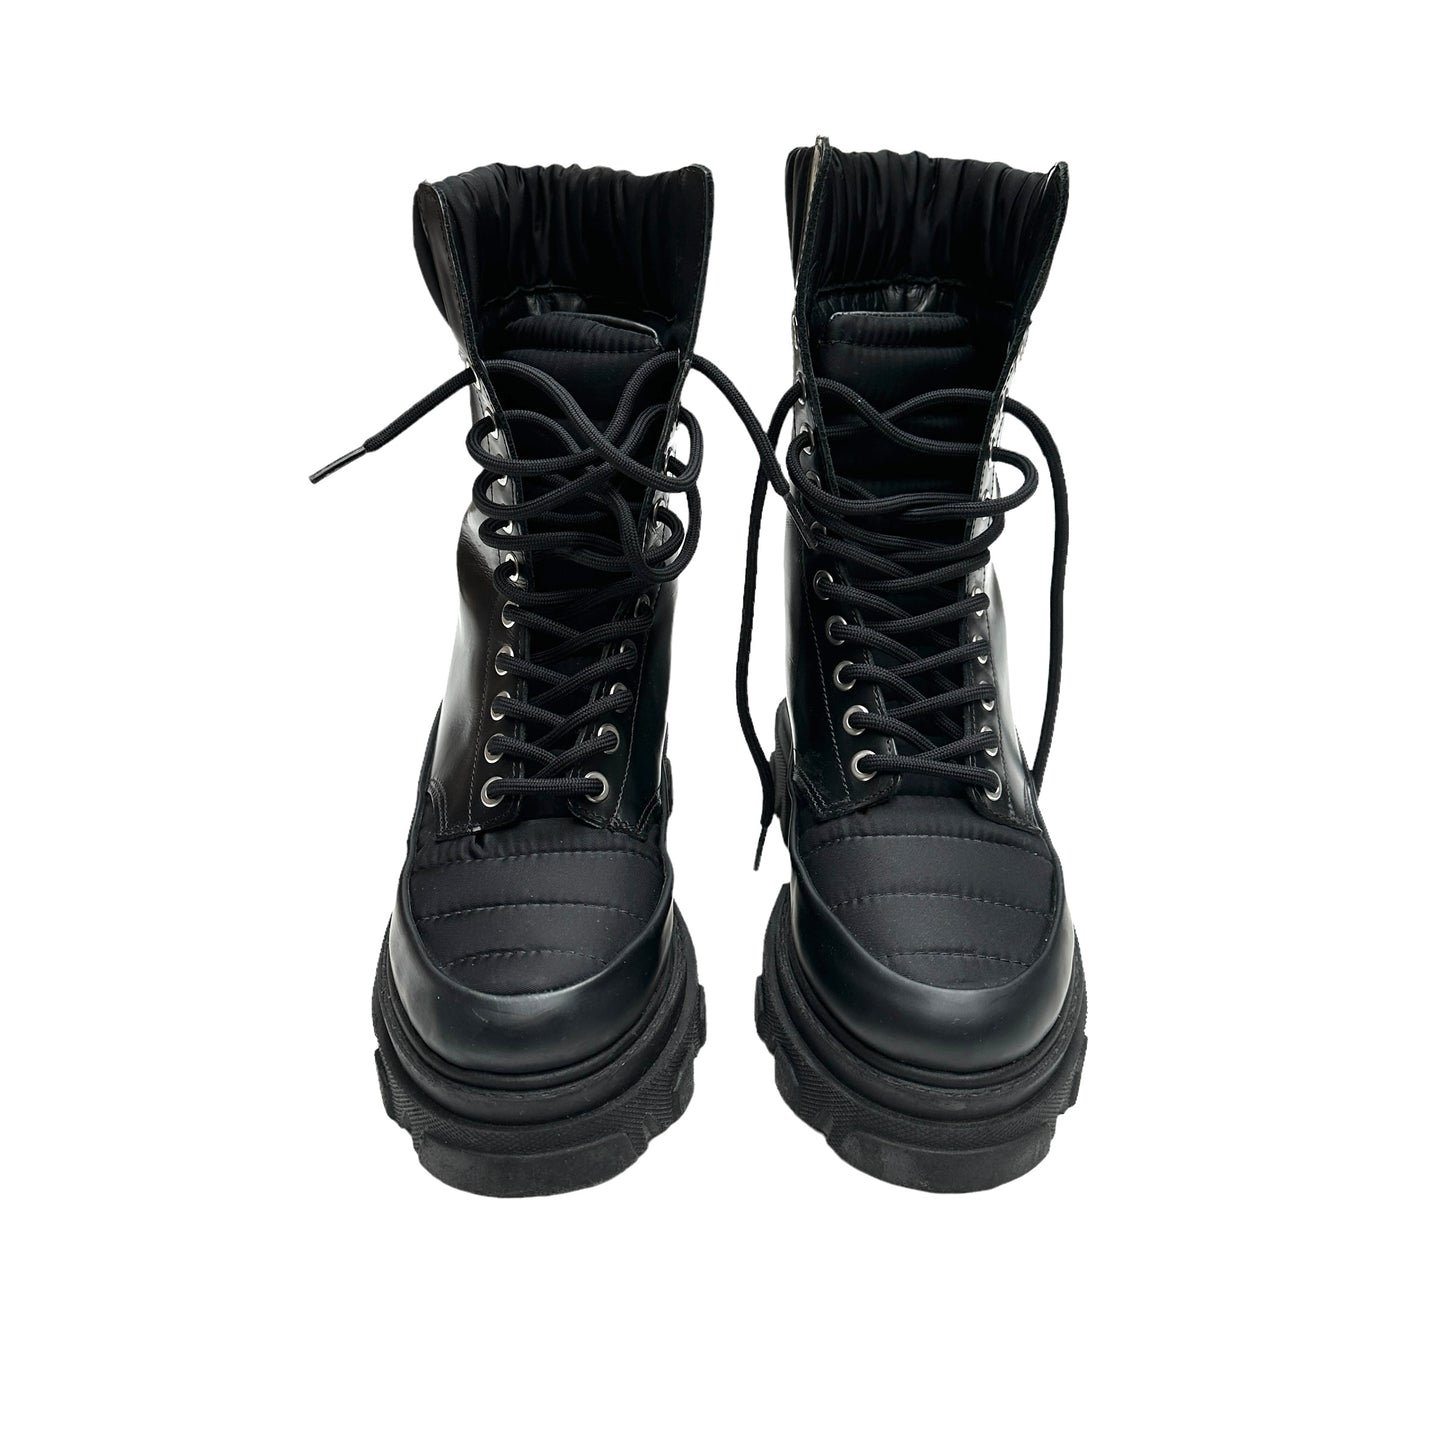 Black Lace-Up Boots - 7